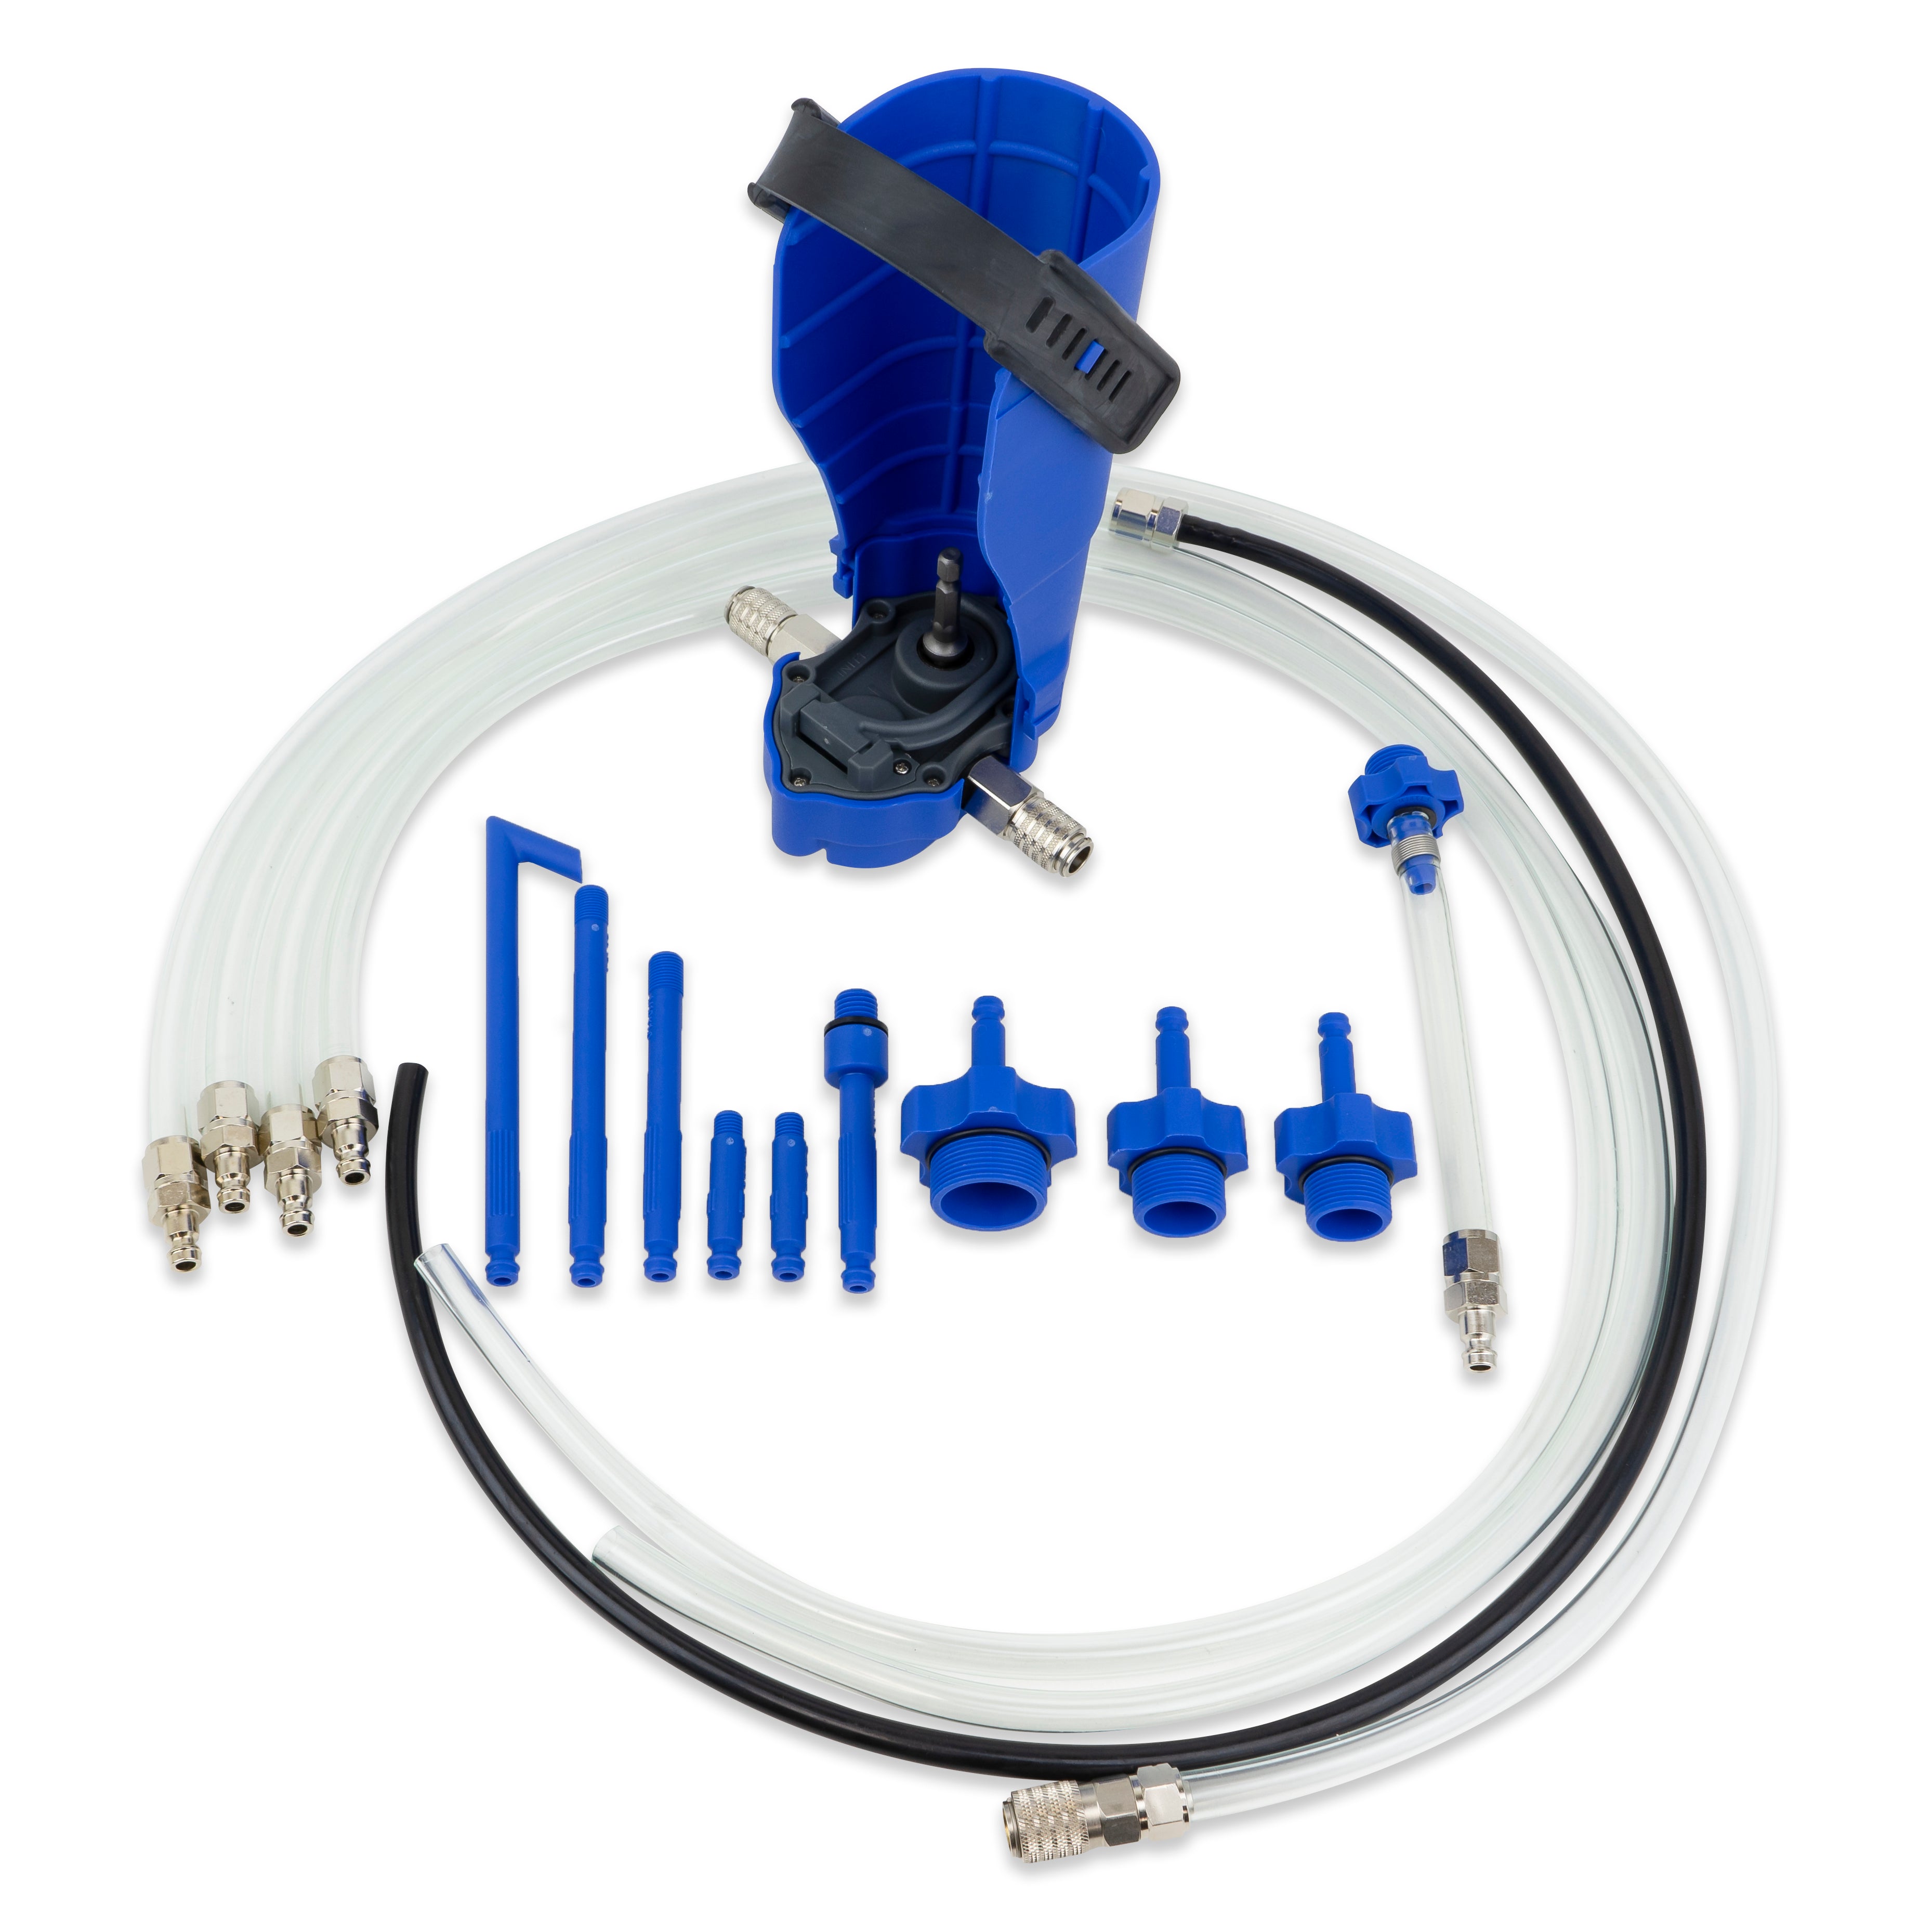 Transmission Service Kit Fluid Transfer Pump - Powered by an Air Ratchet or Cordless Drill